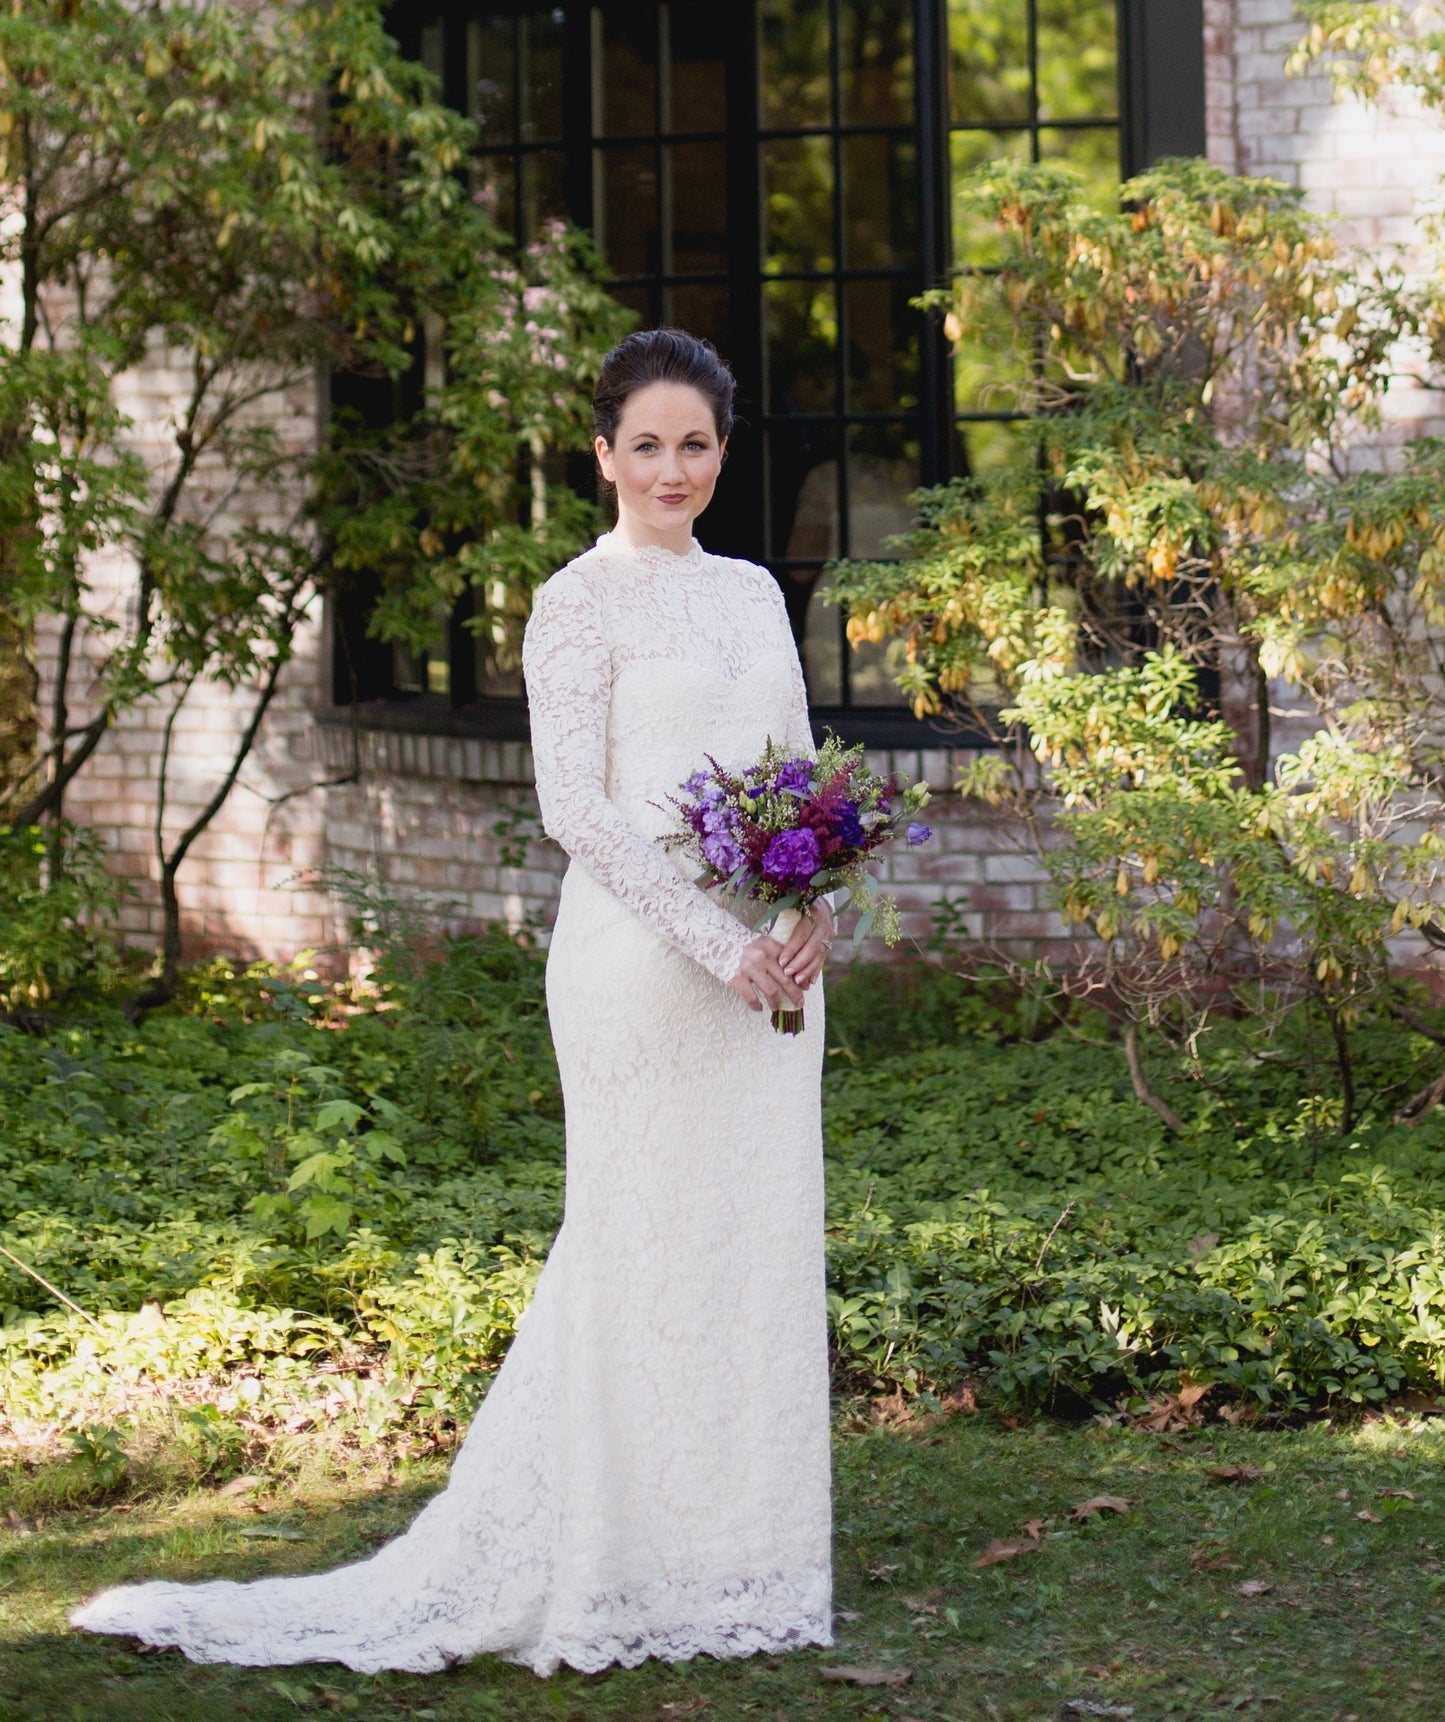 High Neck, Long Sleeved, Open Backed, Corded Lace Wedding Dress with Train